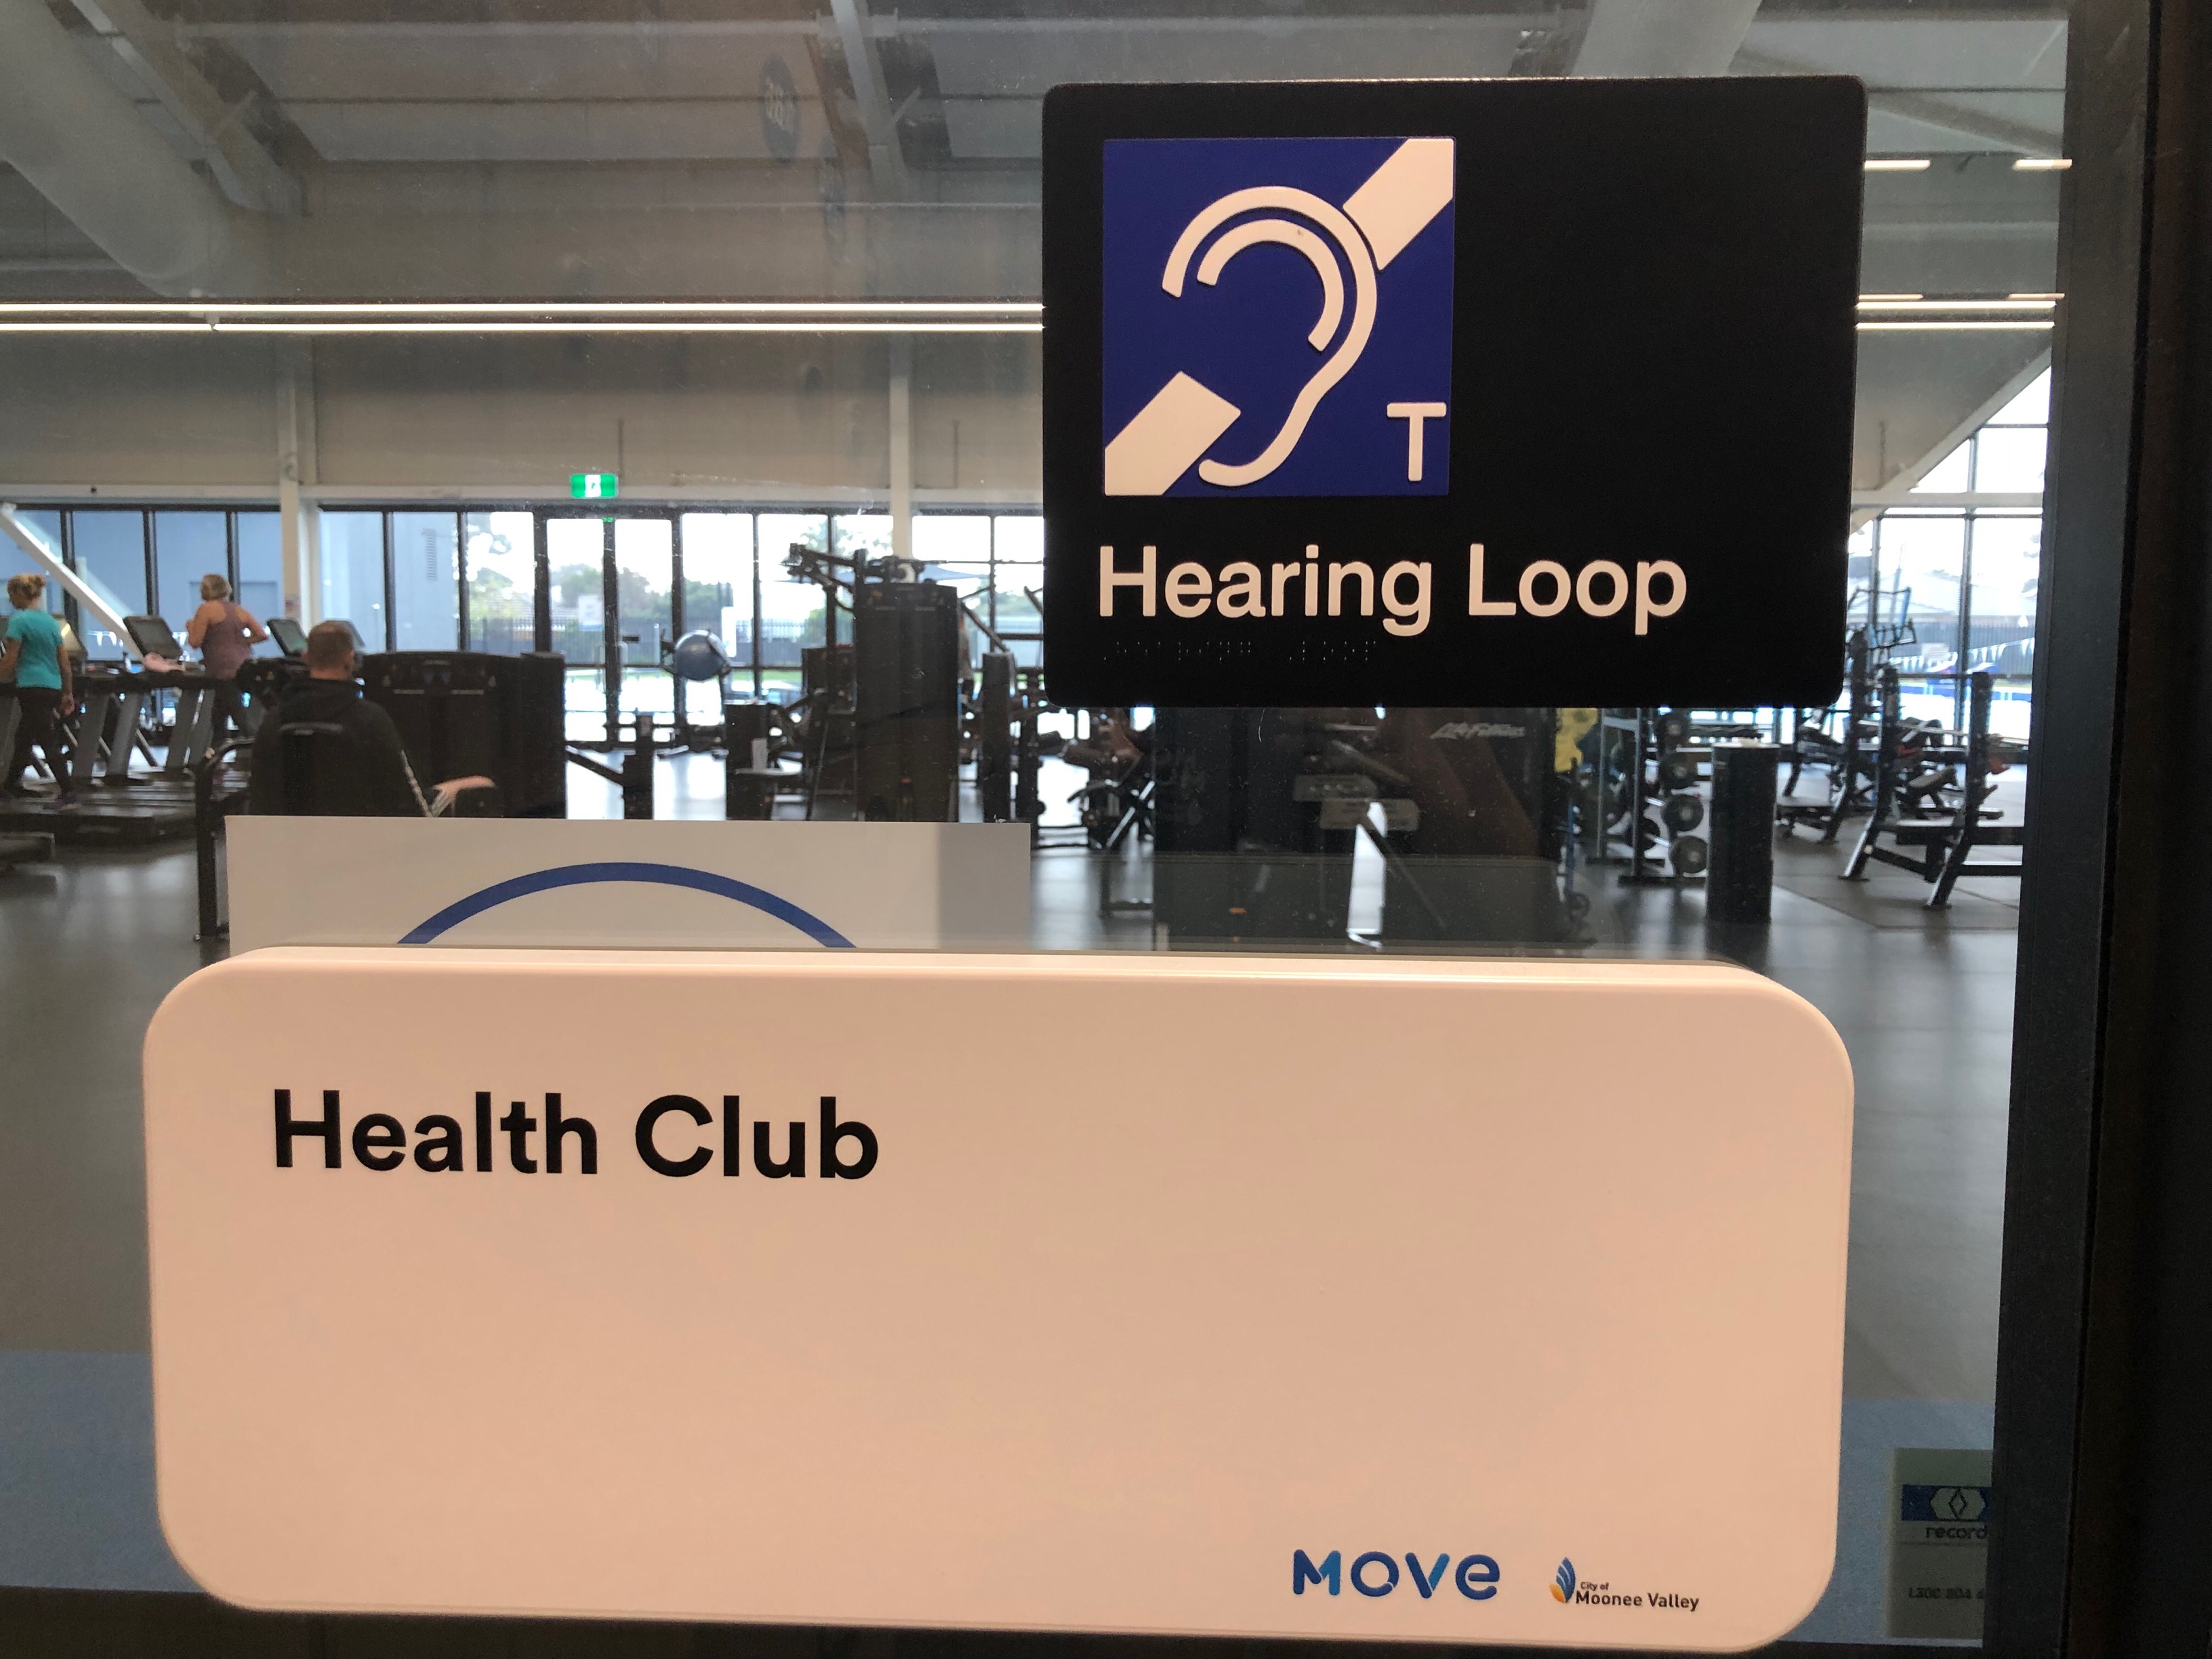 Image of health club entrance door with Hearing Loop signage